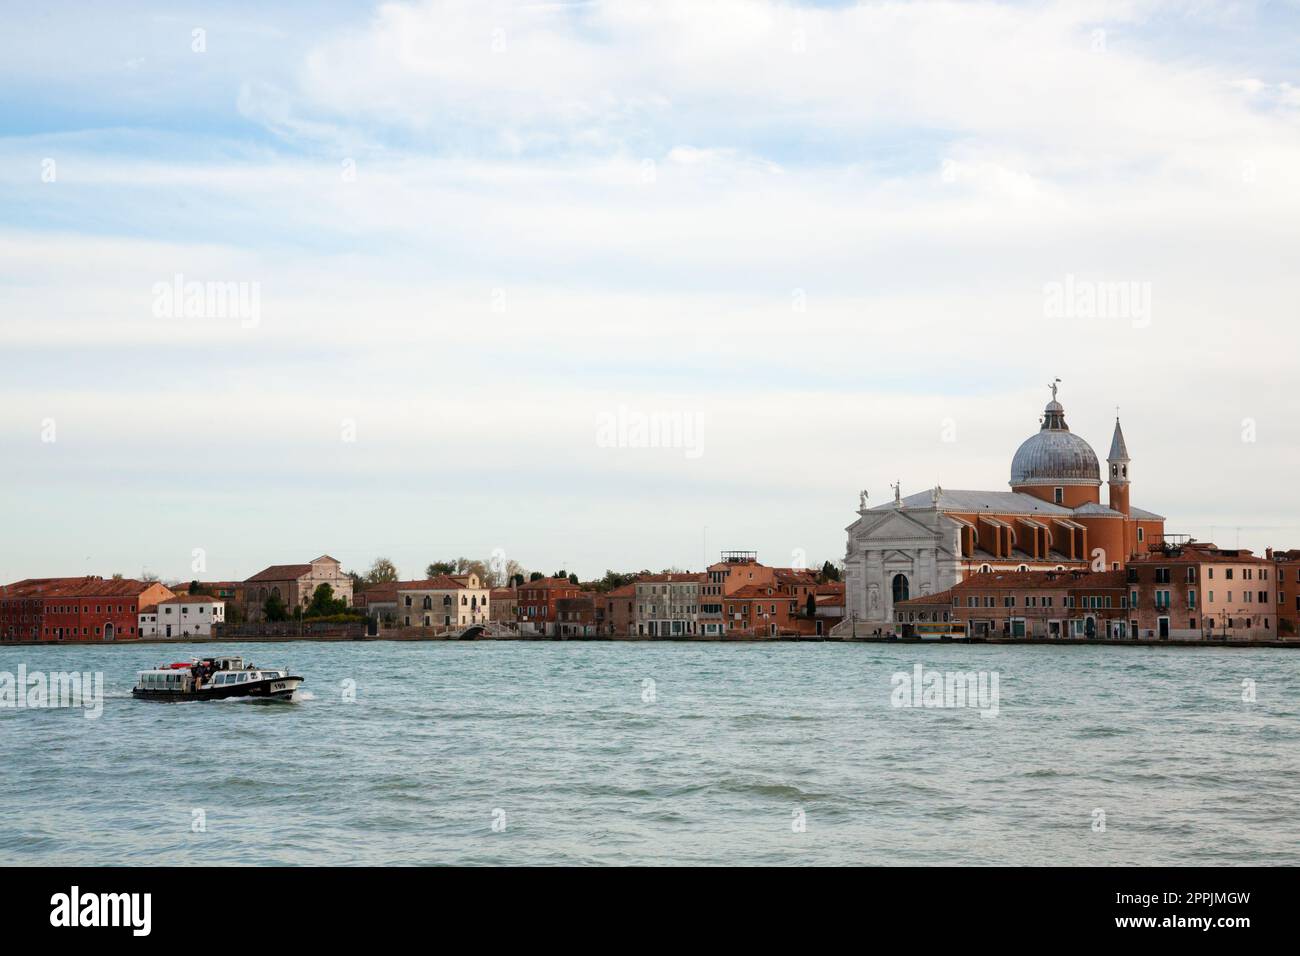 Church of the Most Holy Redeemer. Venice landscape, Italy Stock Photo